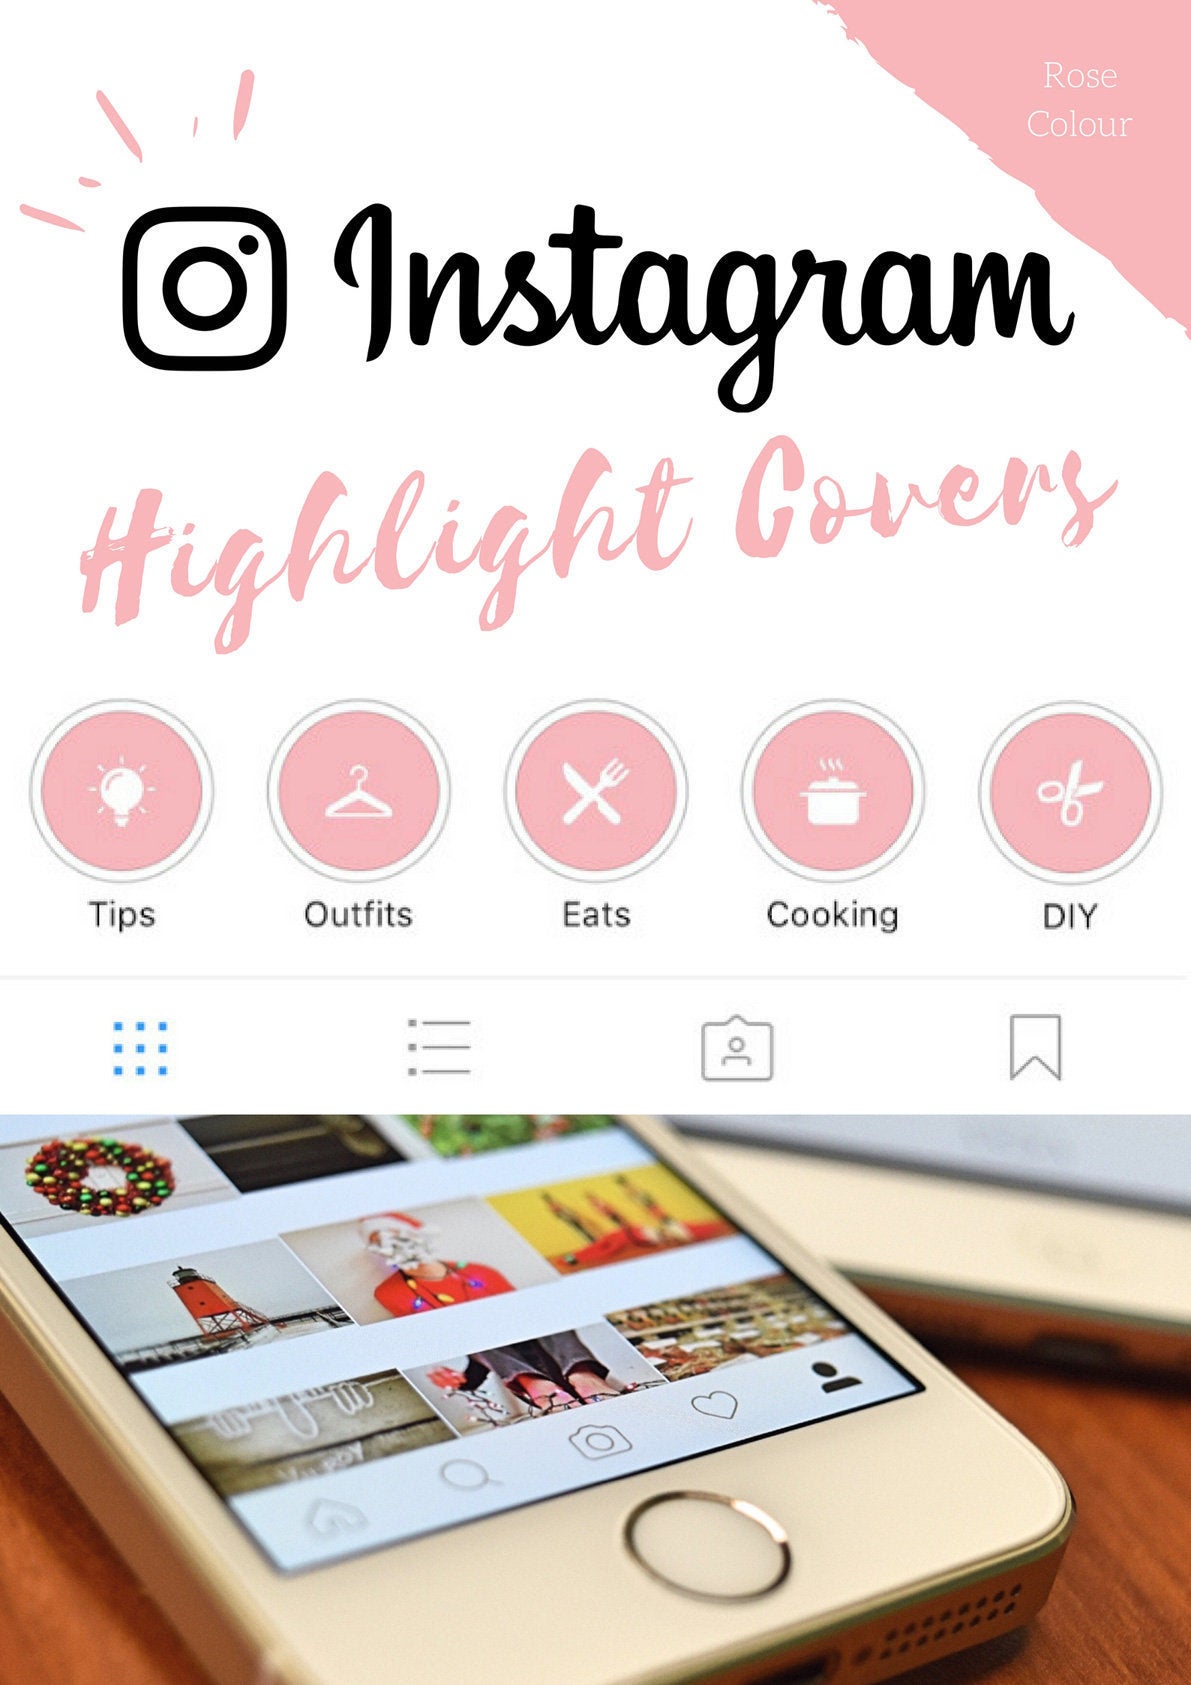 70 Instagram Stories Highlight Covers in Rose Colour.